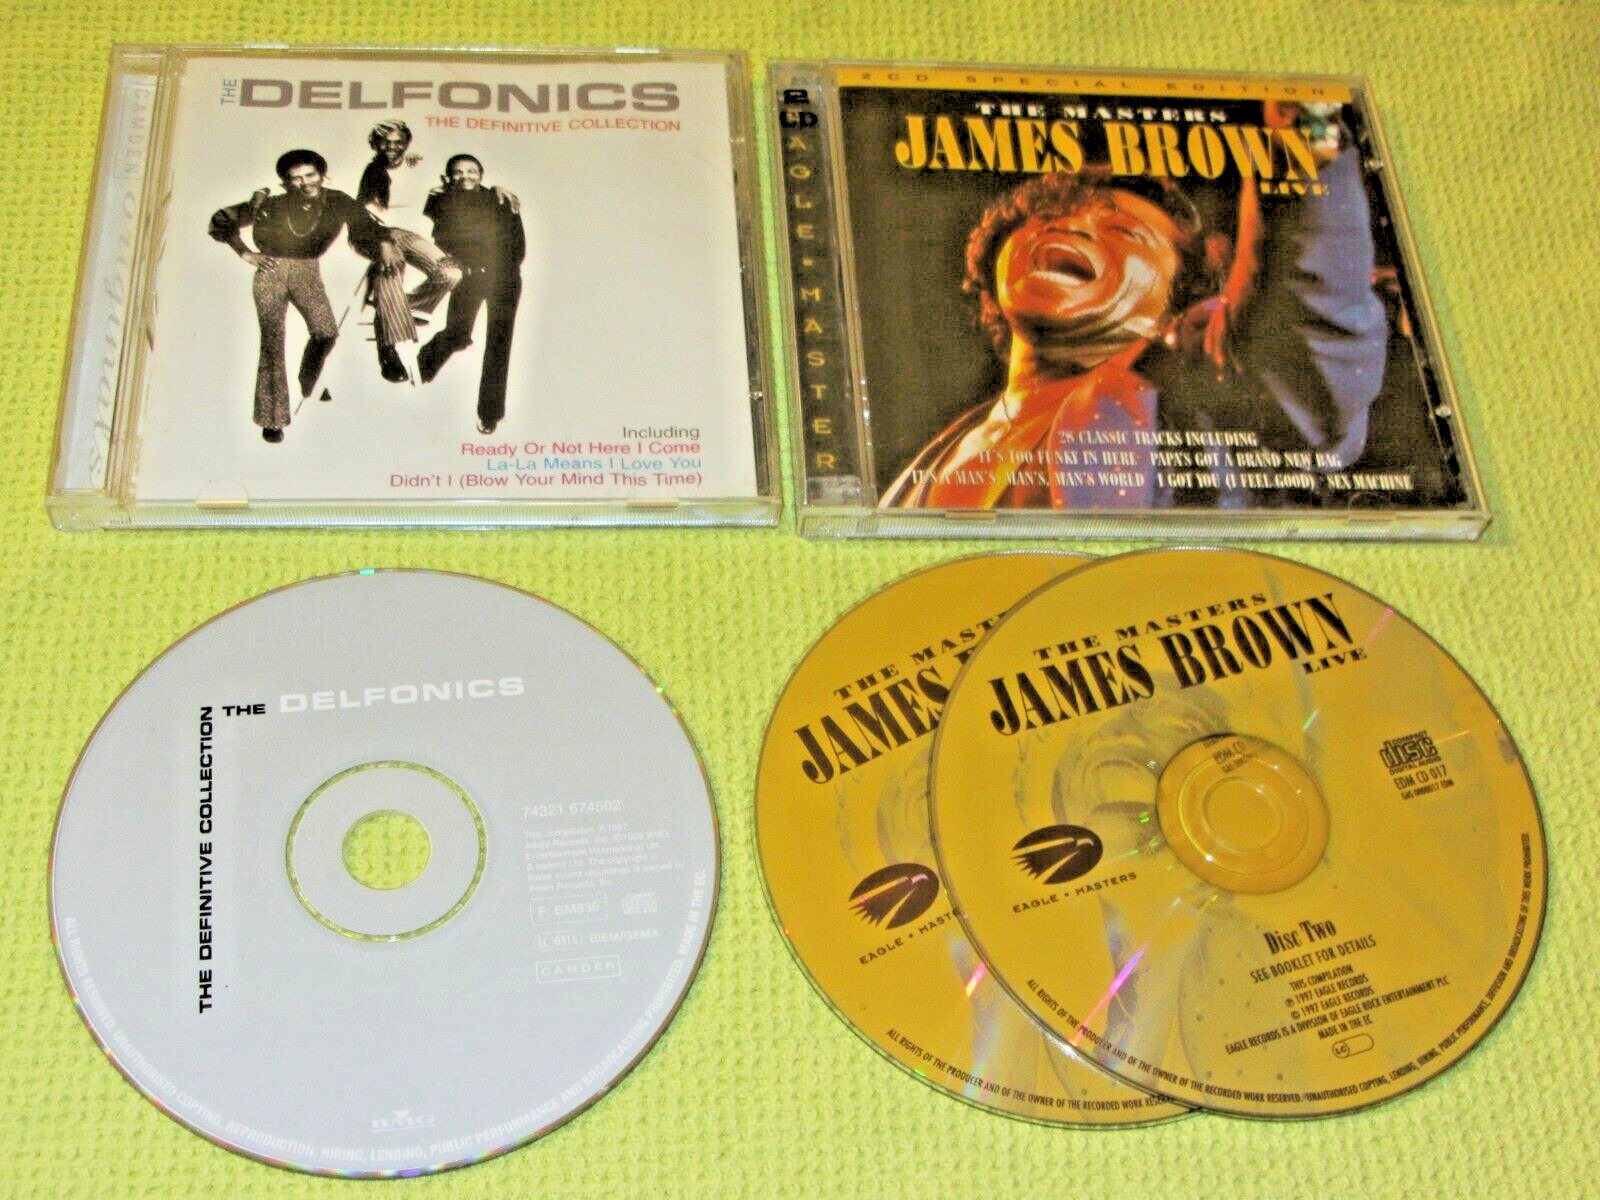 The Masters James Brown Live & The Delfonics Definitive Collection 2 CD Albums